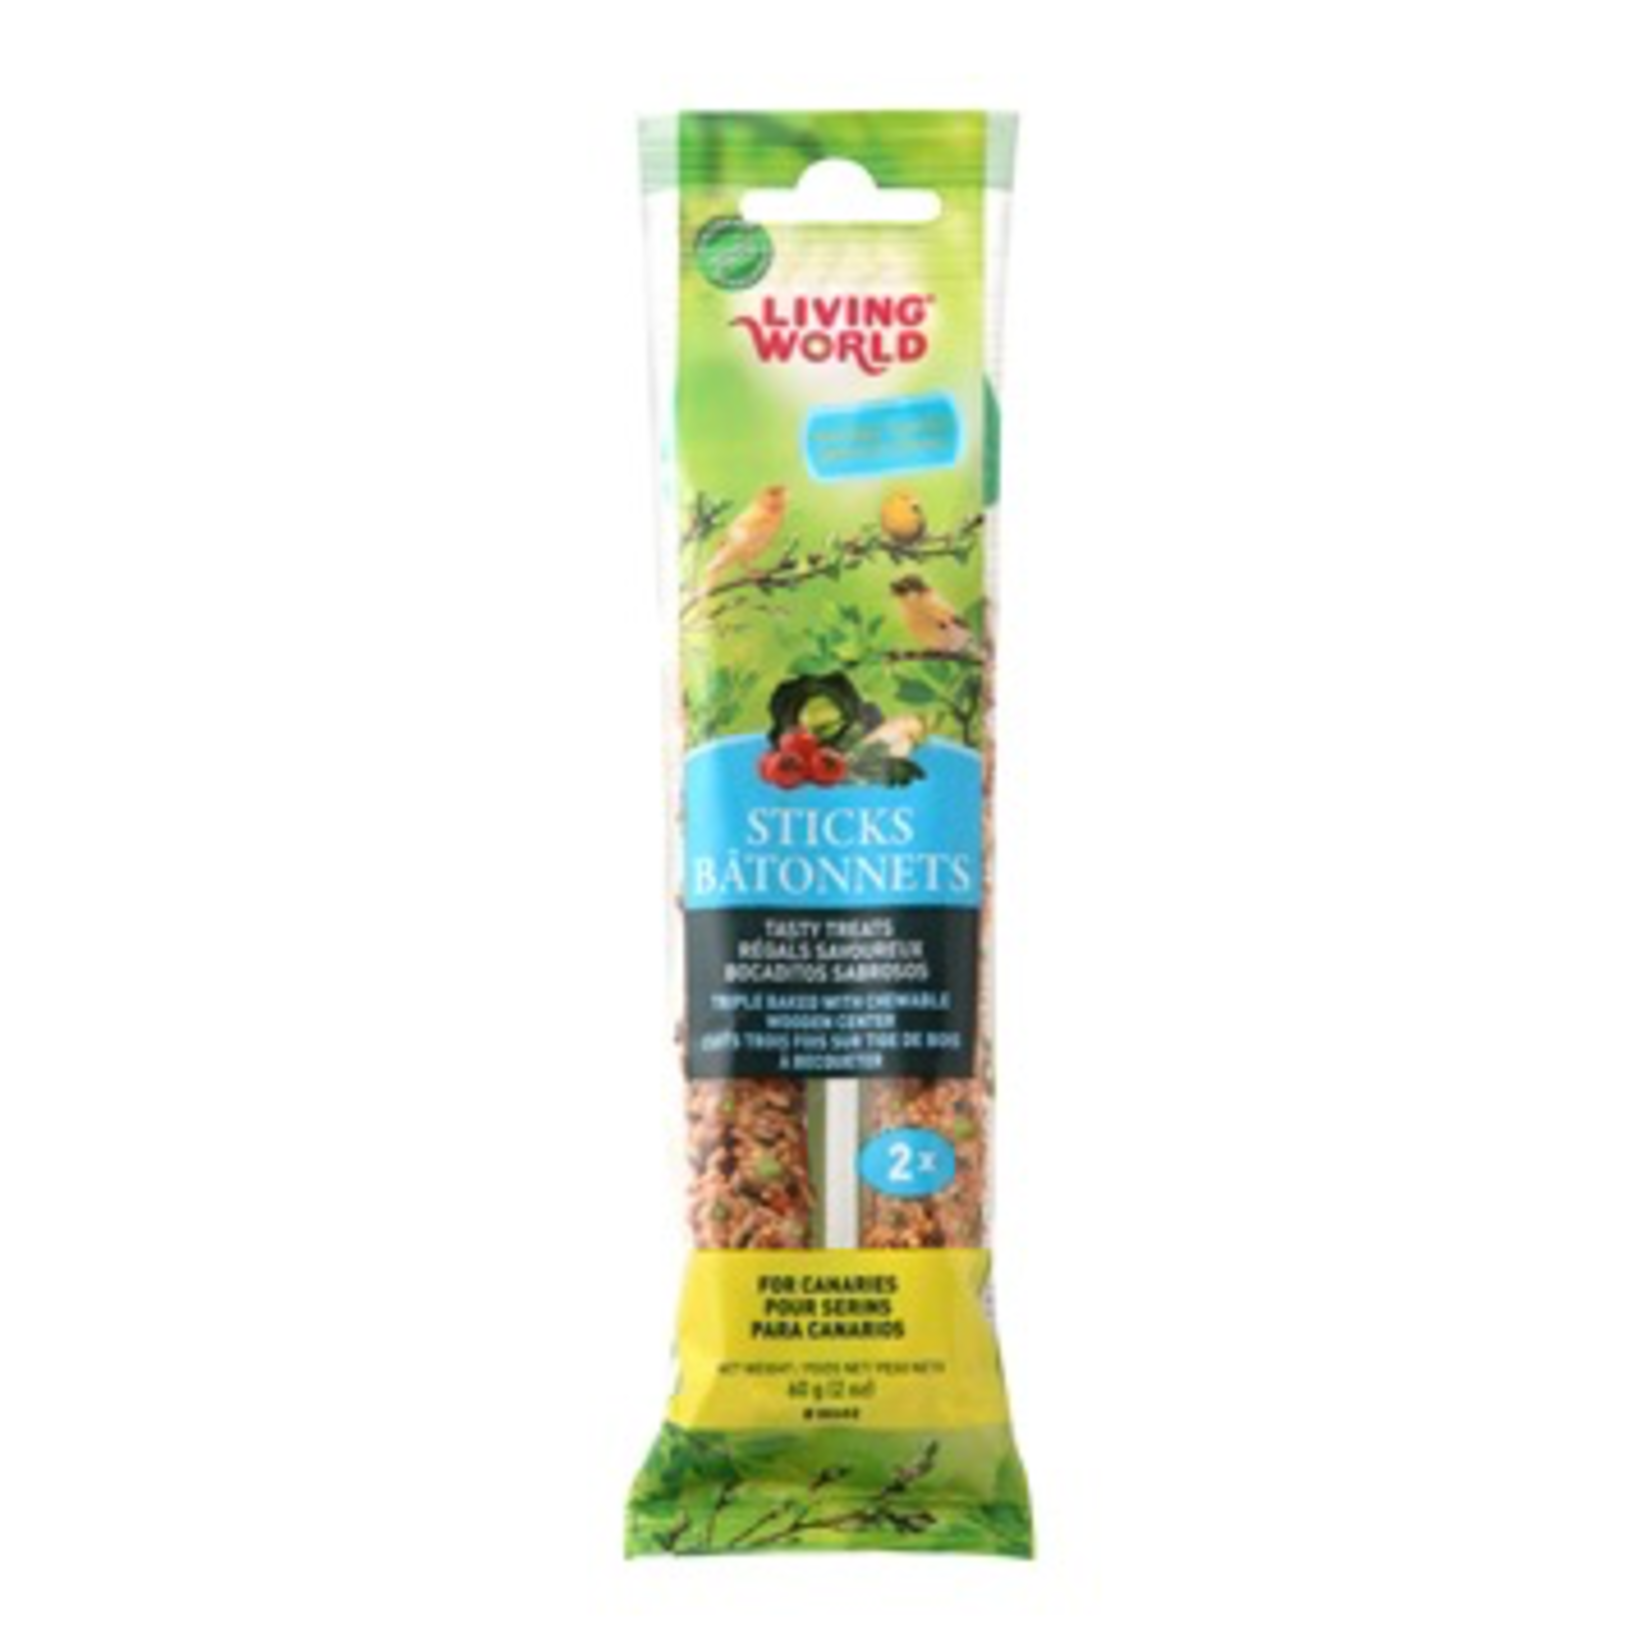 LIVING WORLD (W) Living World Canary Sticks - Vegetable Flavour - 60 g (2 oz), 2-pack